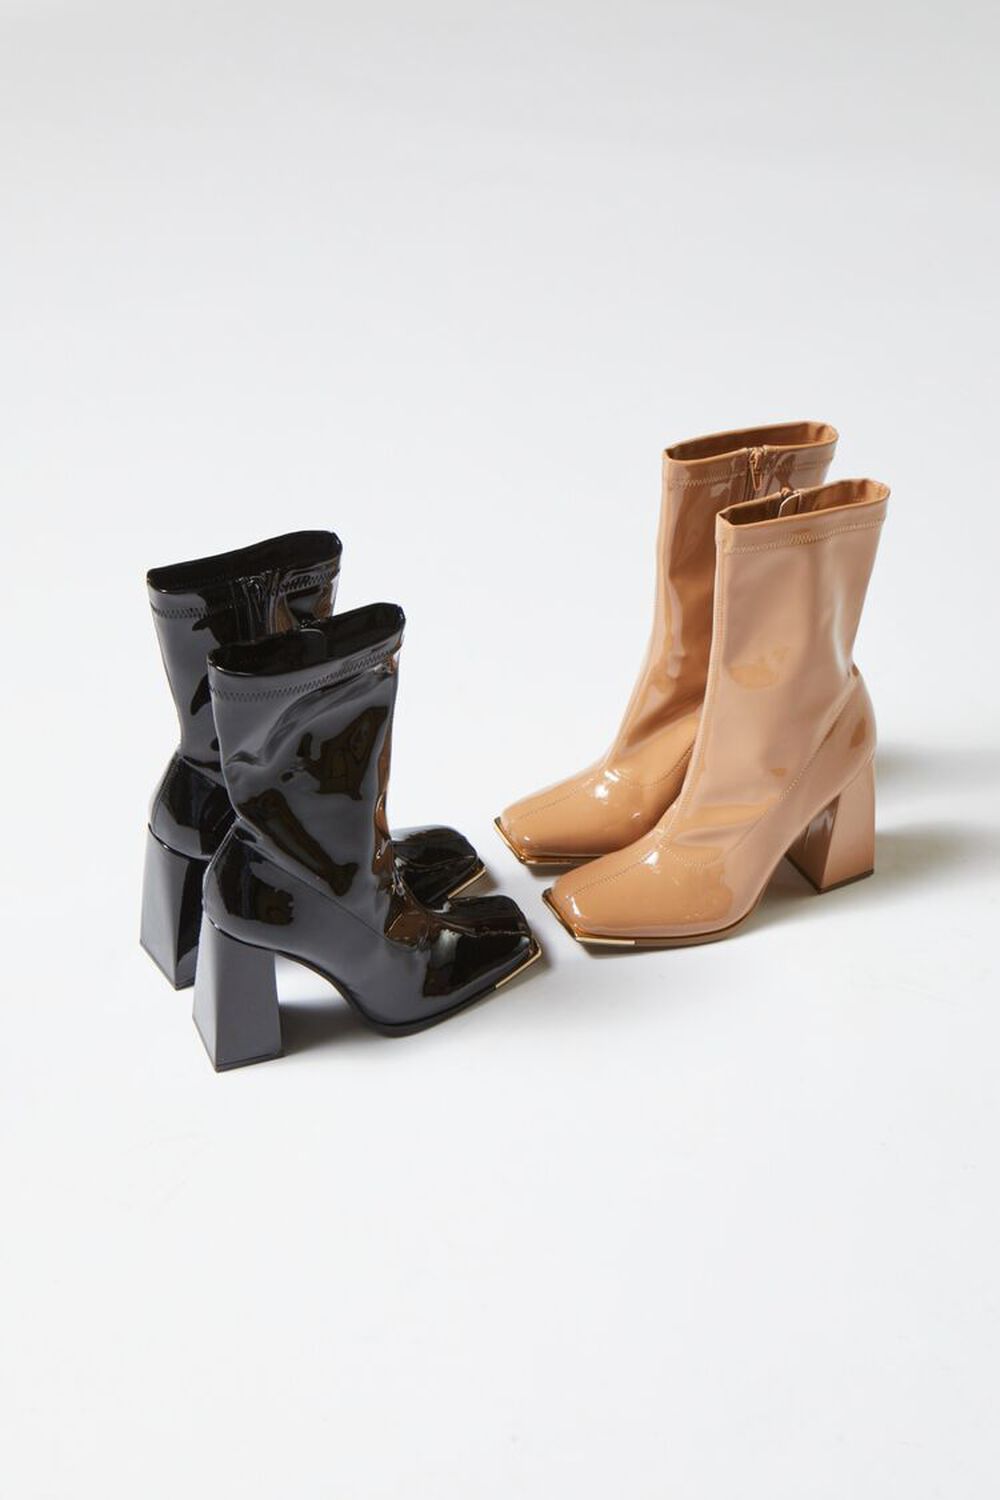 NUDE Faux Patent Leather Booties, image 1